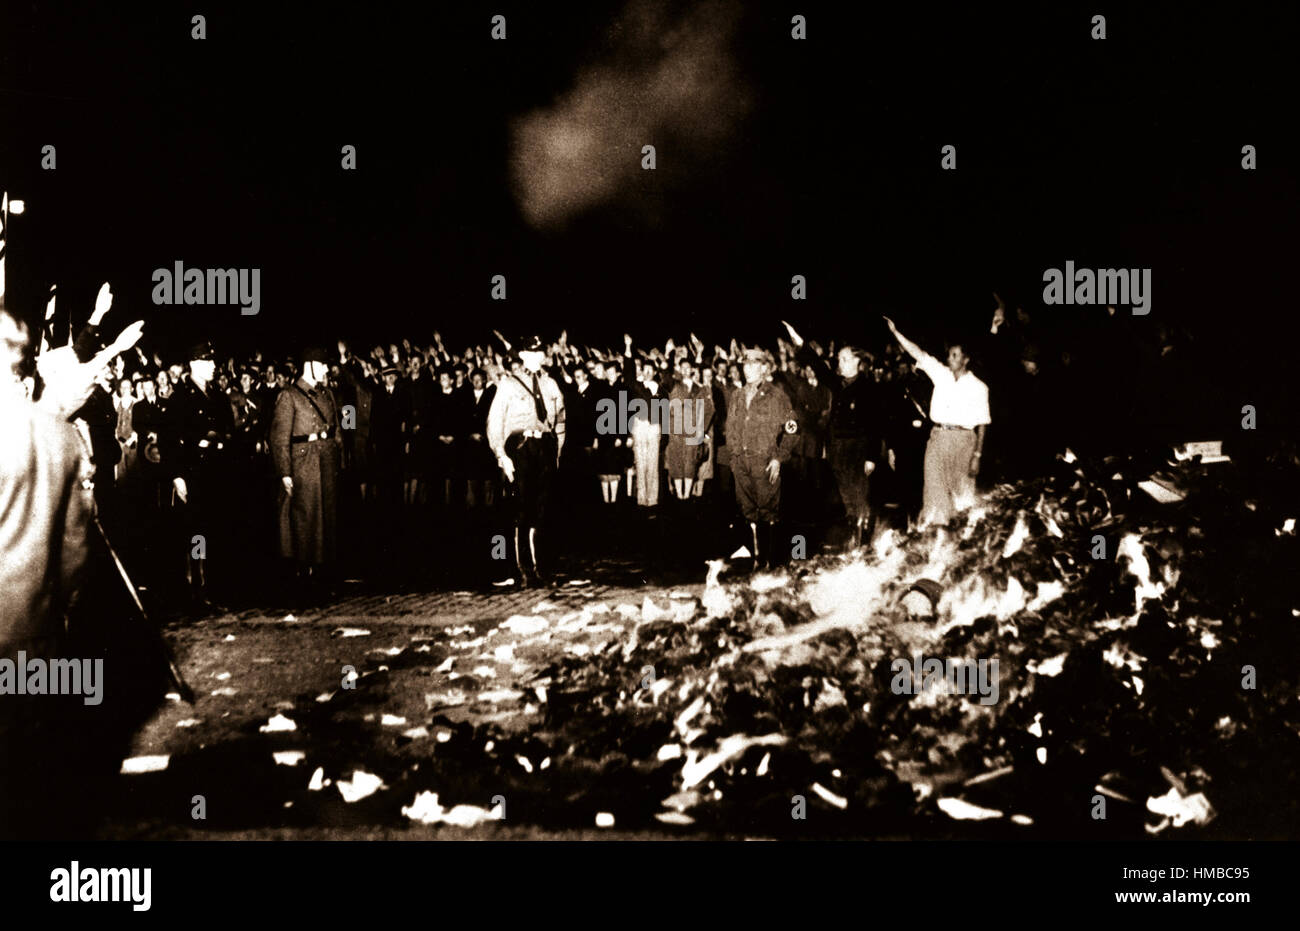 Thousands of books smoulder in a huge bonfire as Germans give the Nazi salute during the wave of book burnings that spread throughout Germany.  1933. Stock Photo